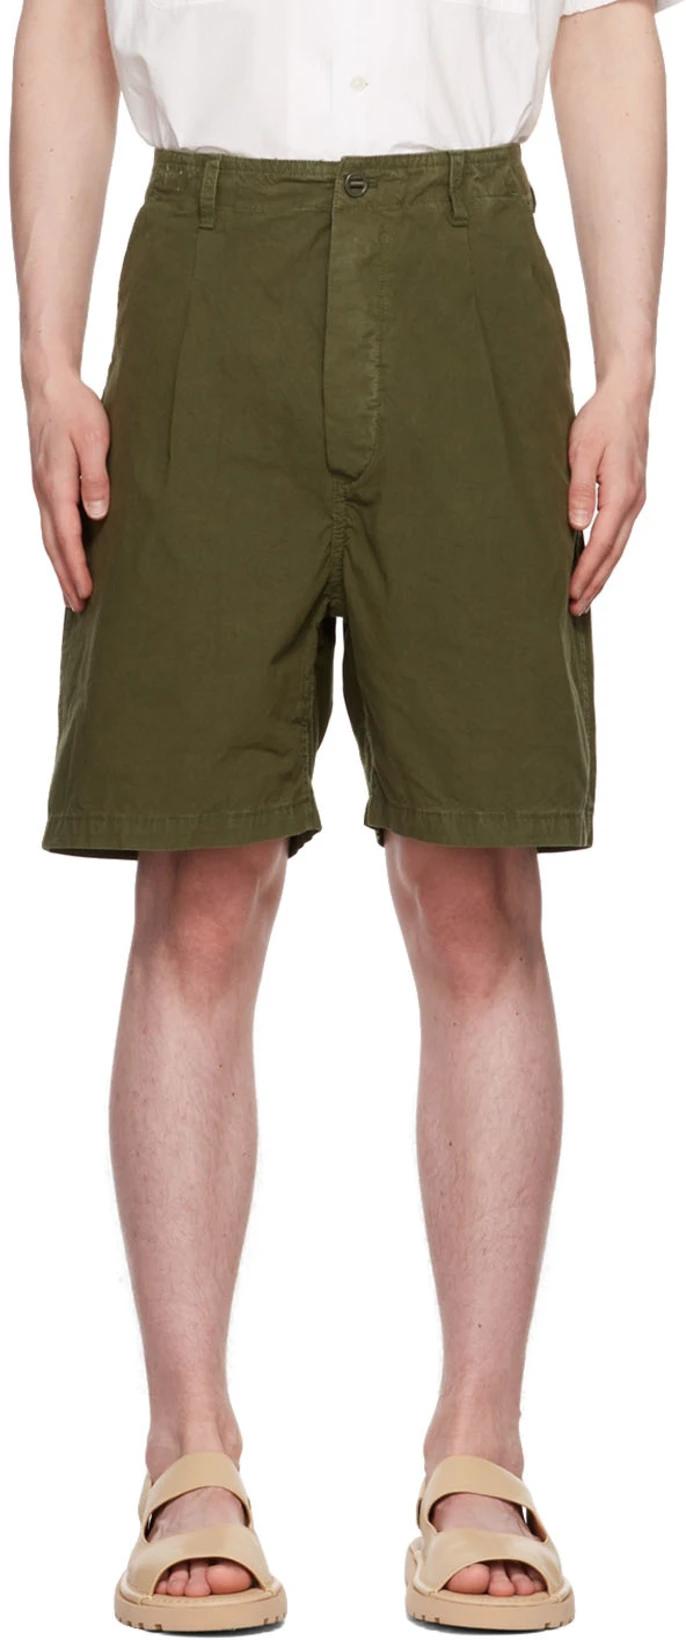 Green DM3-3 Shorts by APPLIED ART FORMS